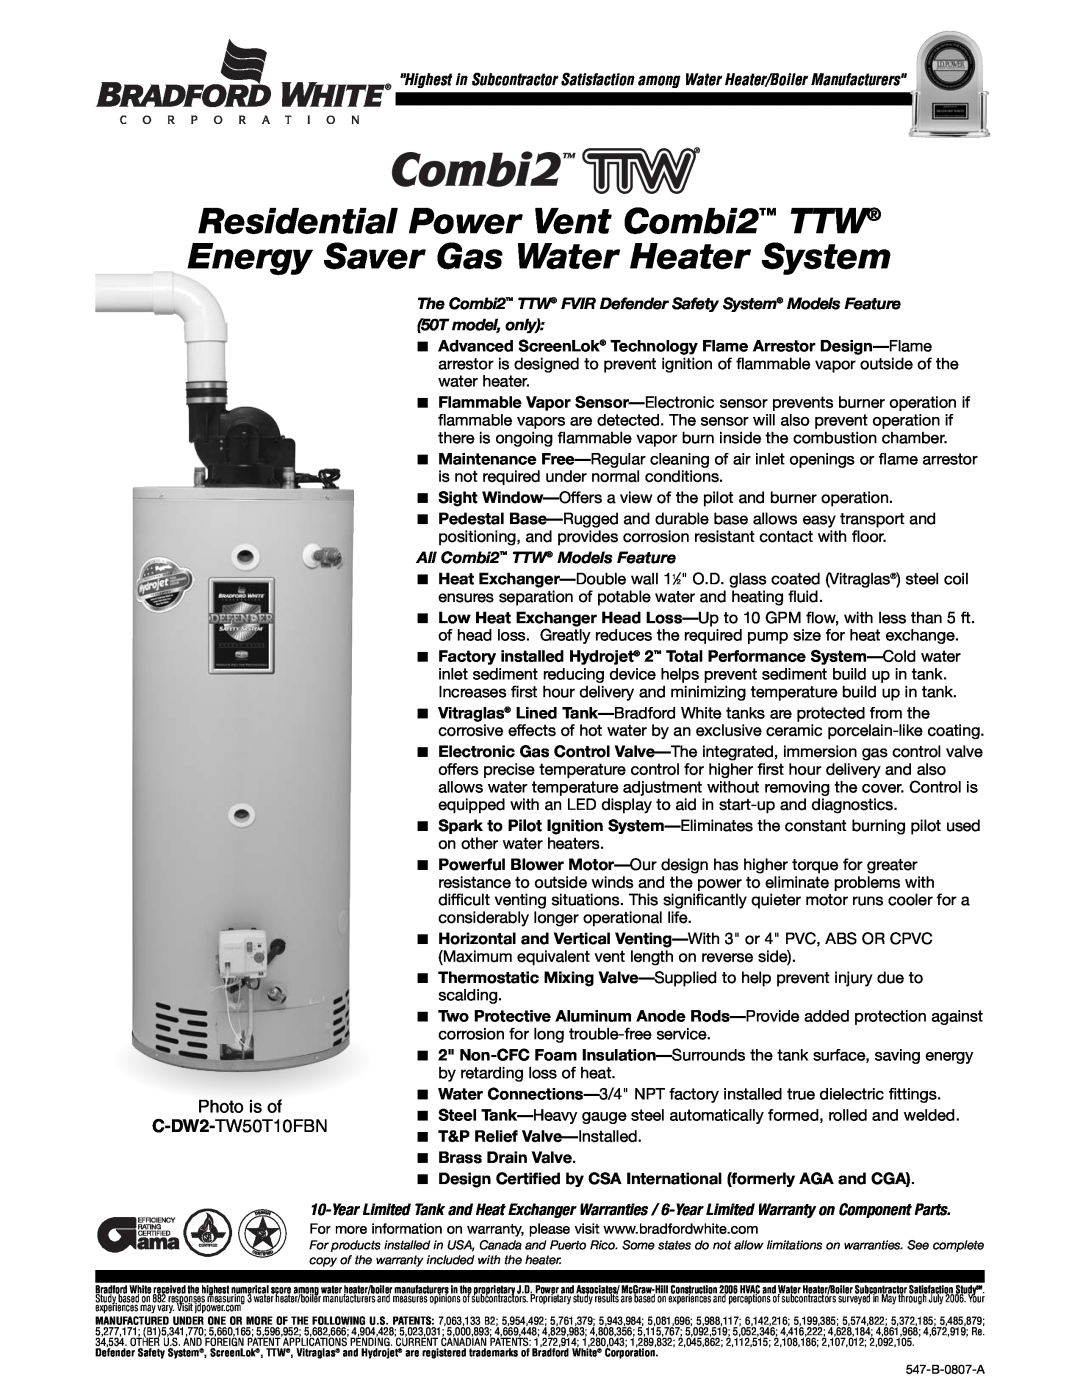 Bradford-White Corp 547-B warranty Photo is of C-DW2-TW50T10FBN, The Combi2 TTW FVIR Defender Safety System Models Feature 